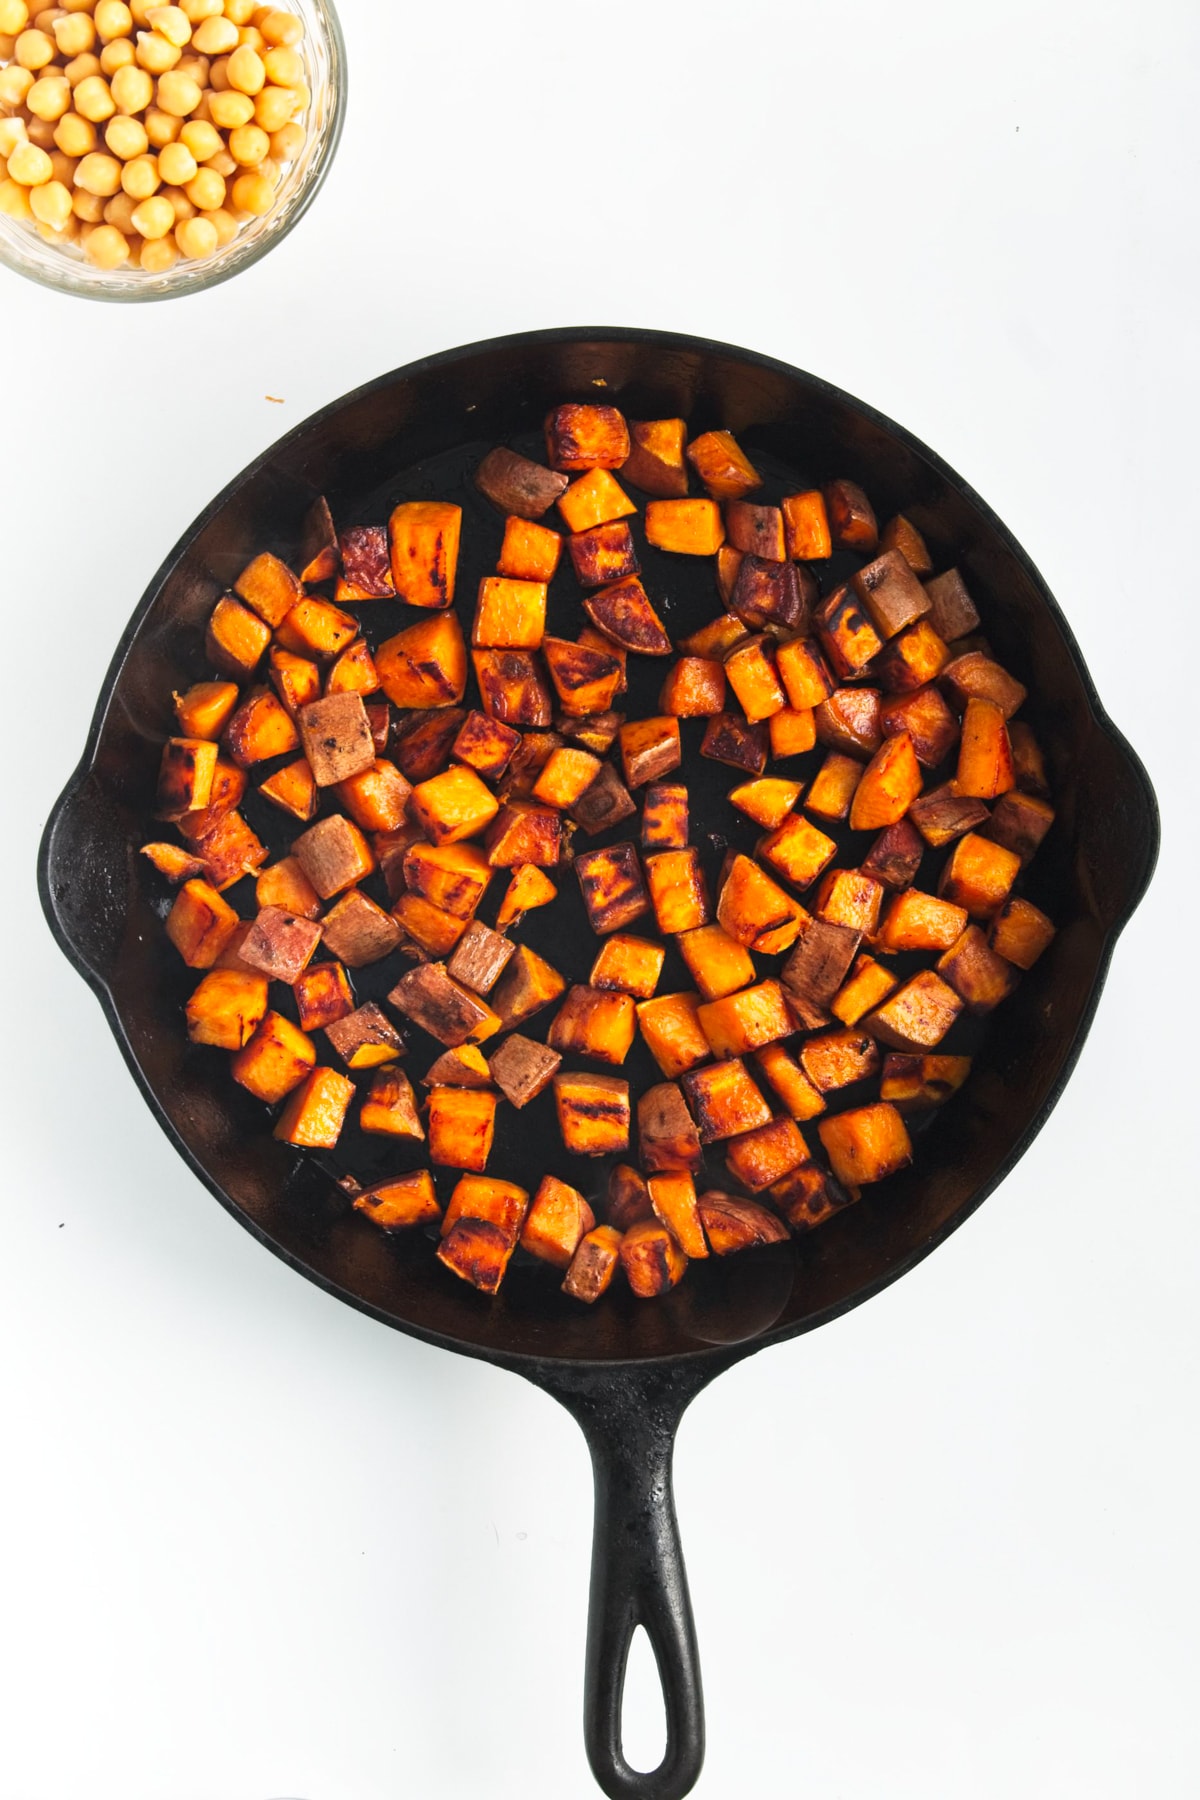 cooked sweet potatoes in a black skillet